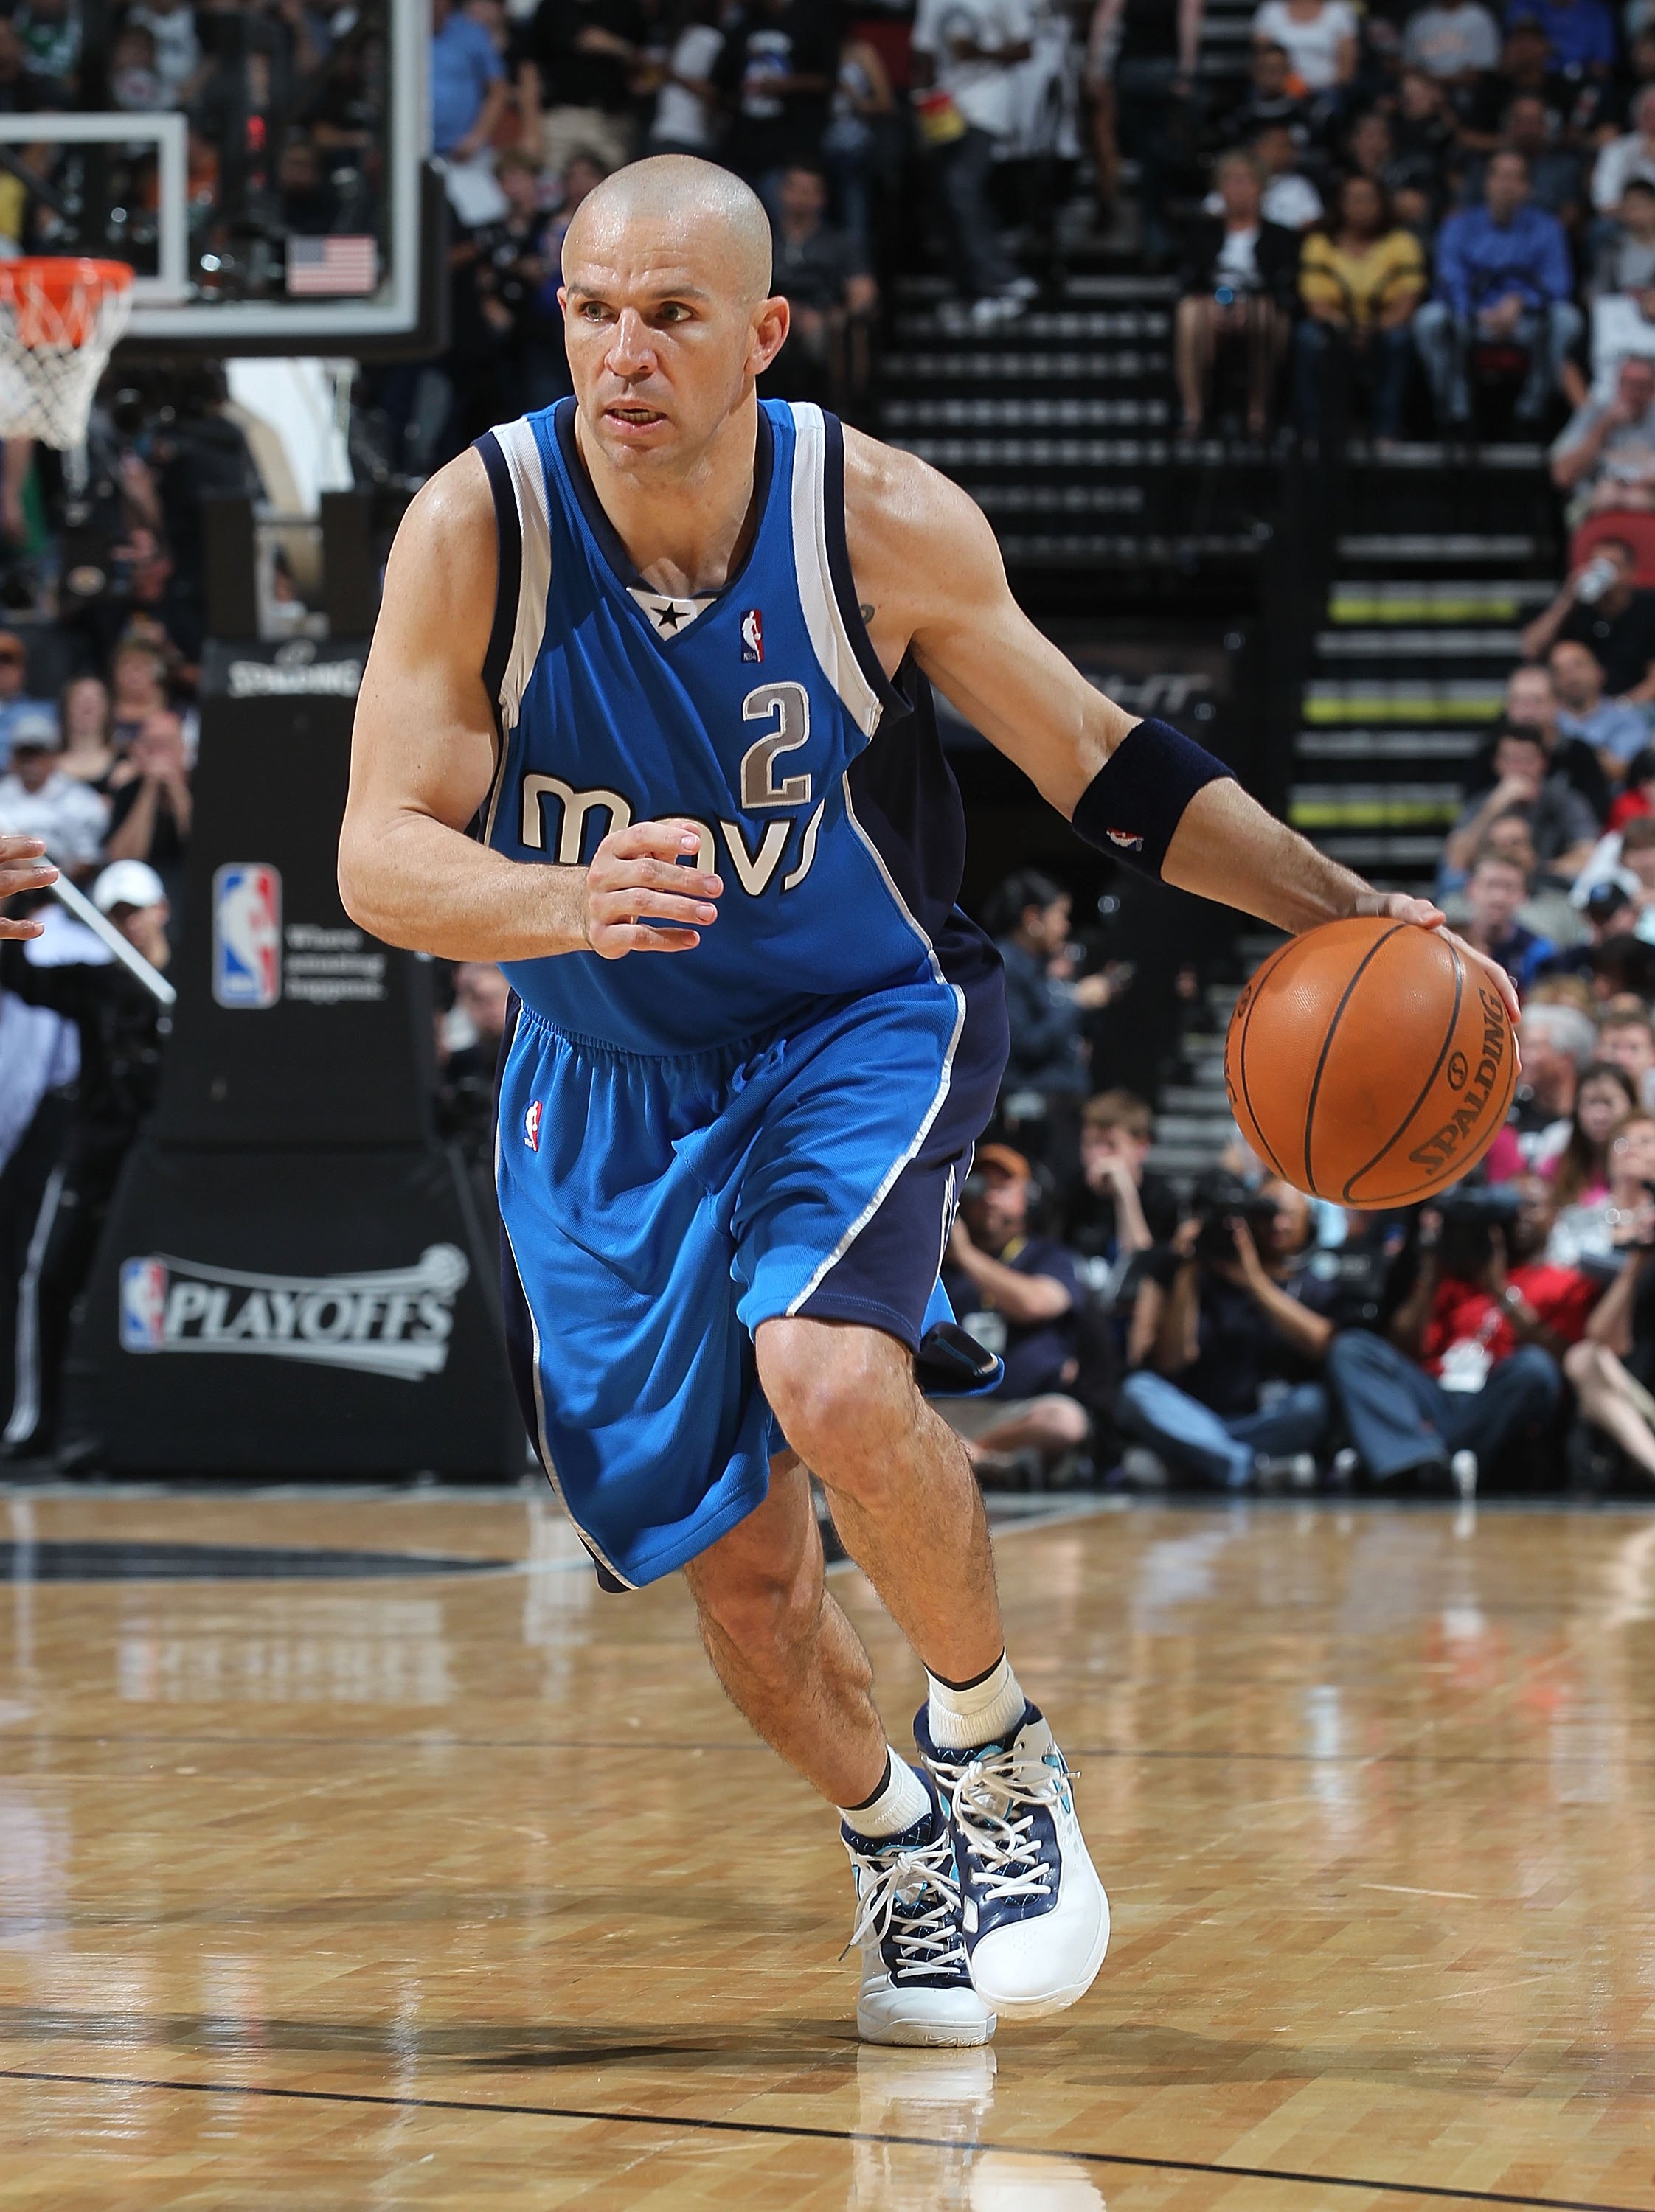 SAN ANTONIO - APRIL 25:  Jason Kidd #2 of the Dallas Mavericks in Game Four of the Western Conference Quarterfinals during the 2010 NBA Playoffs at AT&T Center on April 25, 2010 in San Antonio, Texas. NOTE TO USER: User expressly acknowledges and agrees t